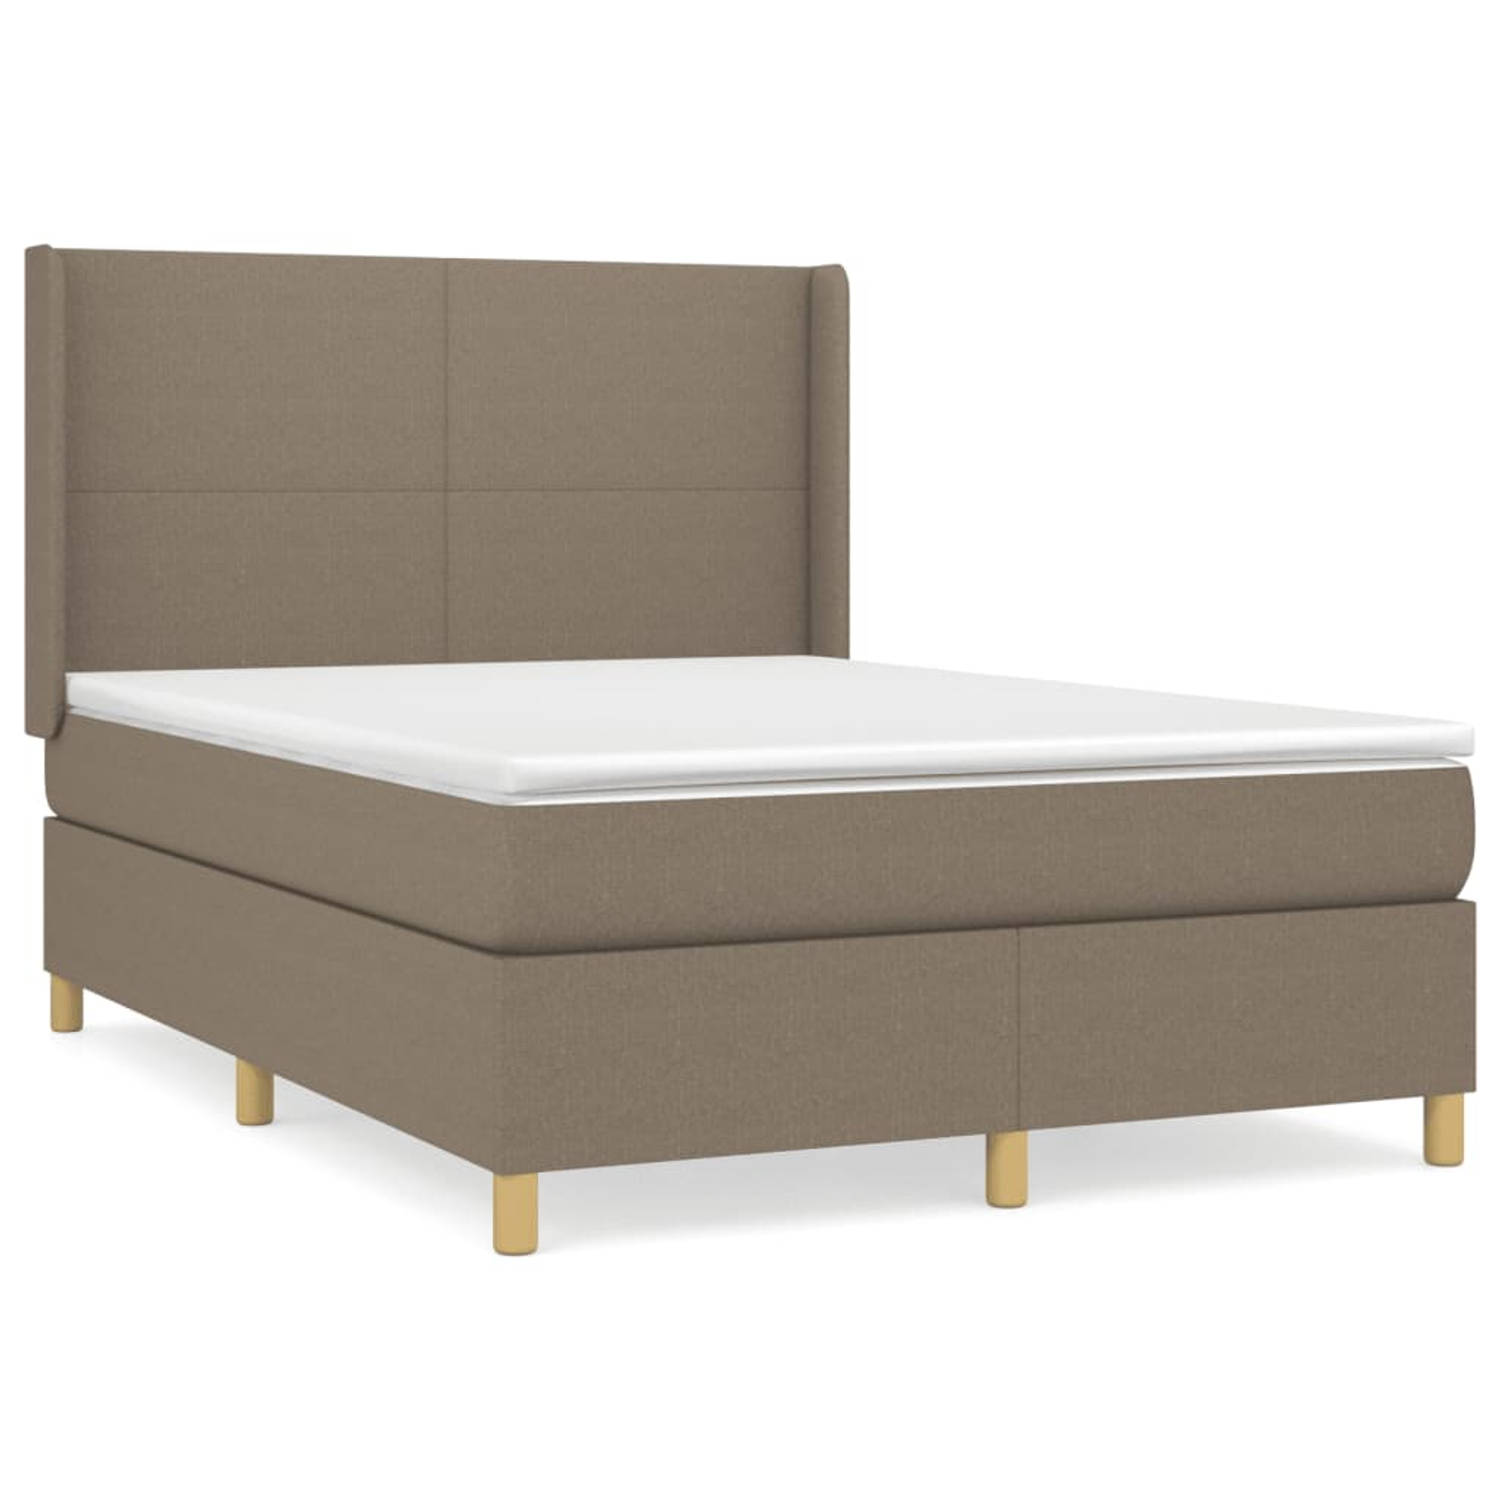 The Living Store Boxspringbed - Taupe - 193 x 147 x 118/128 cm - Duurzaam materiaal